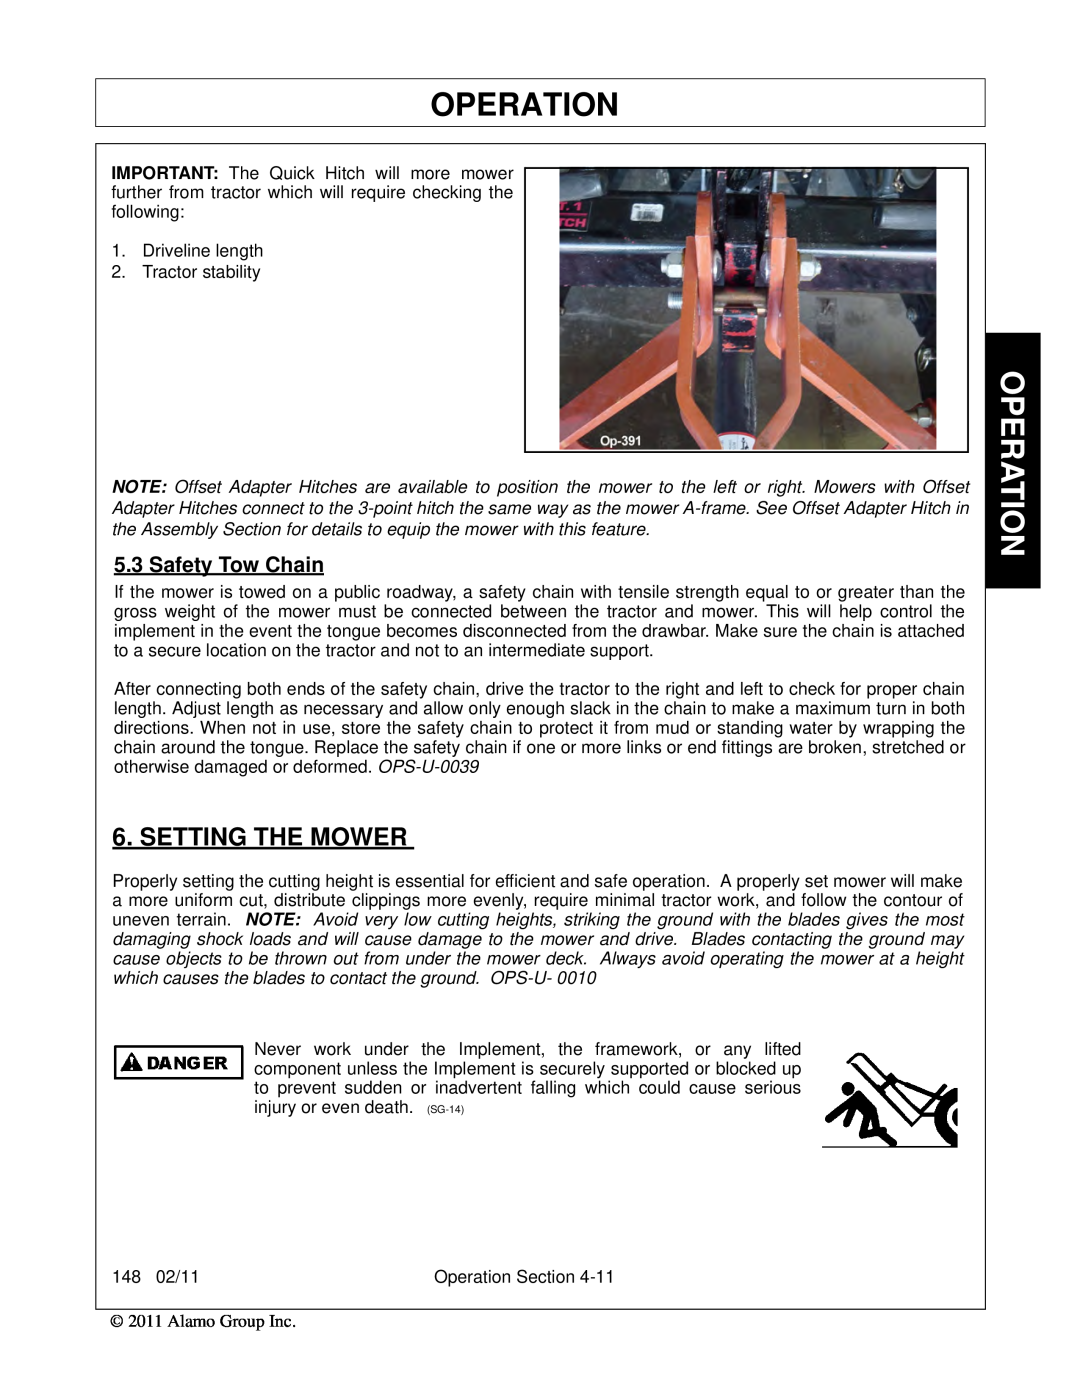 Rhino Mounts 148 manual Setting The Mower, Operation, Safety Tow Chain 